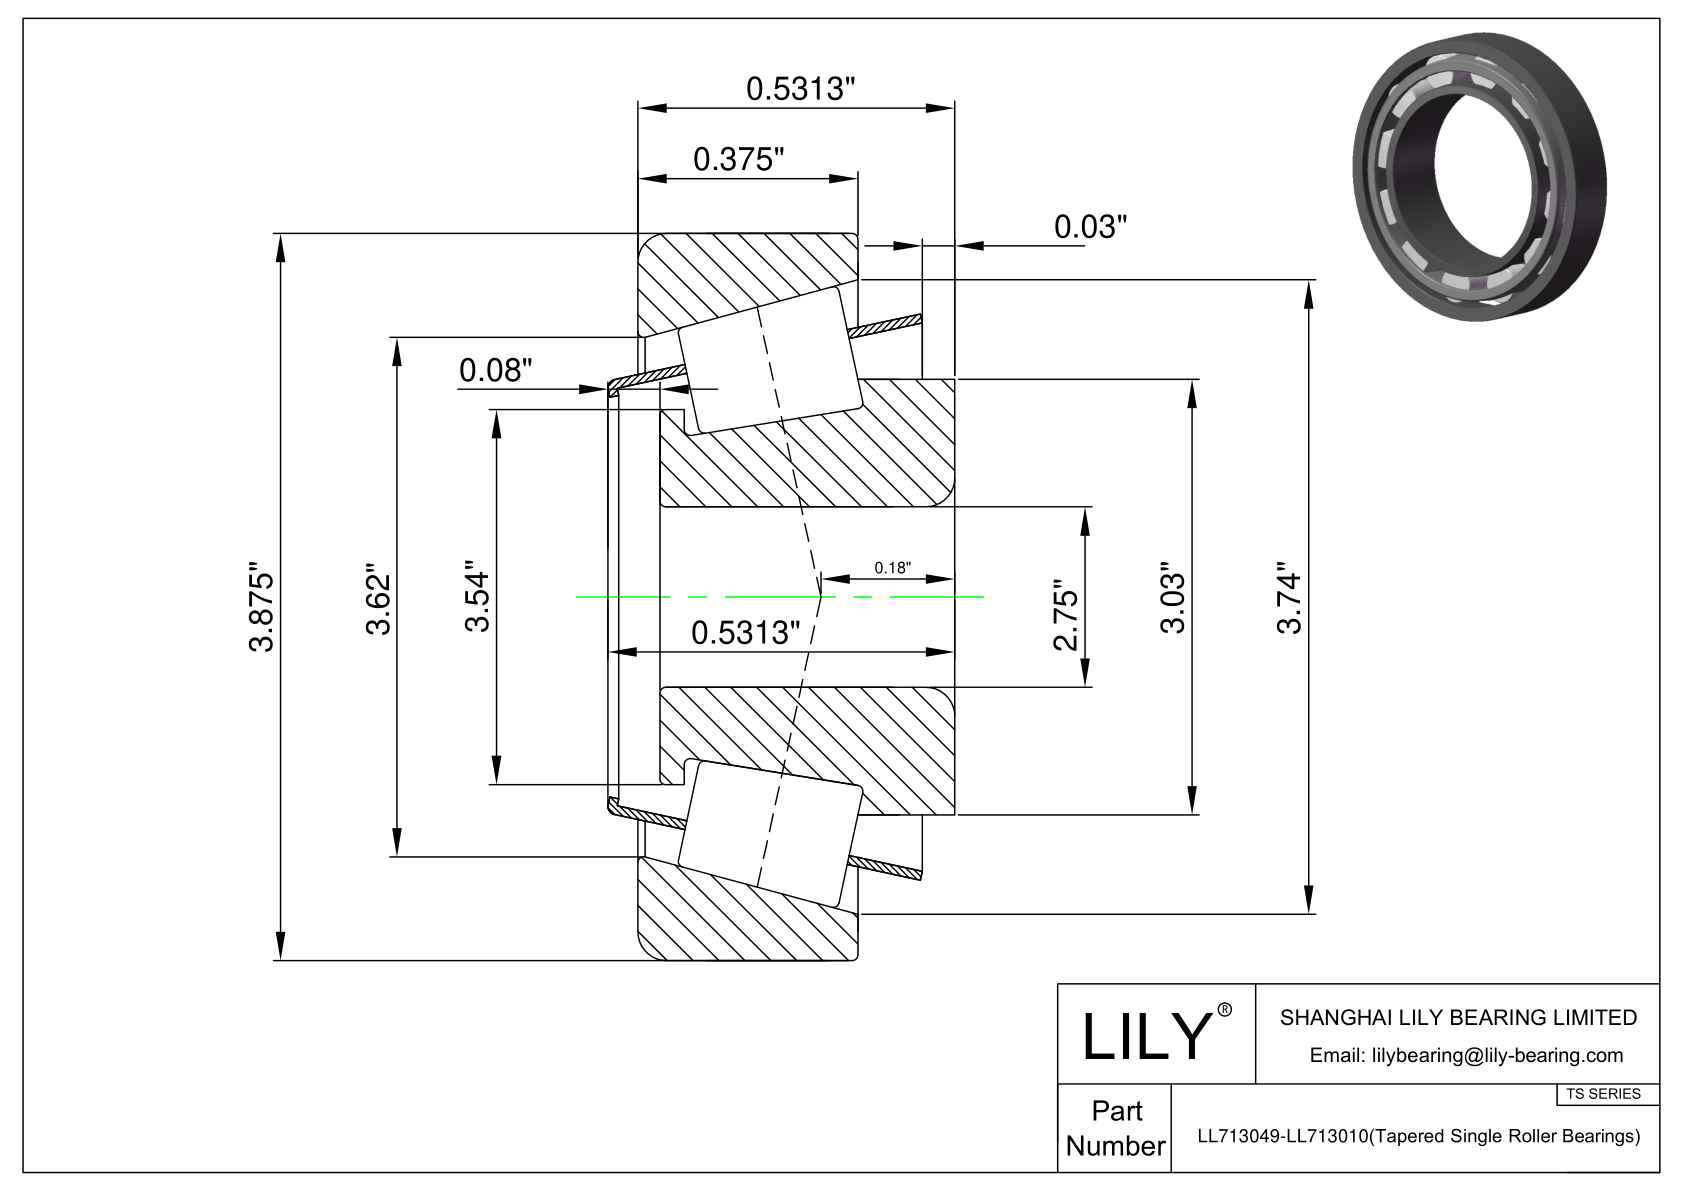 LL713049-LL713010 TS (Tapered Single Roller Bearings) (Imperial) cad drawing